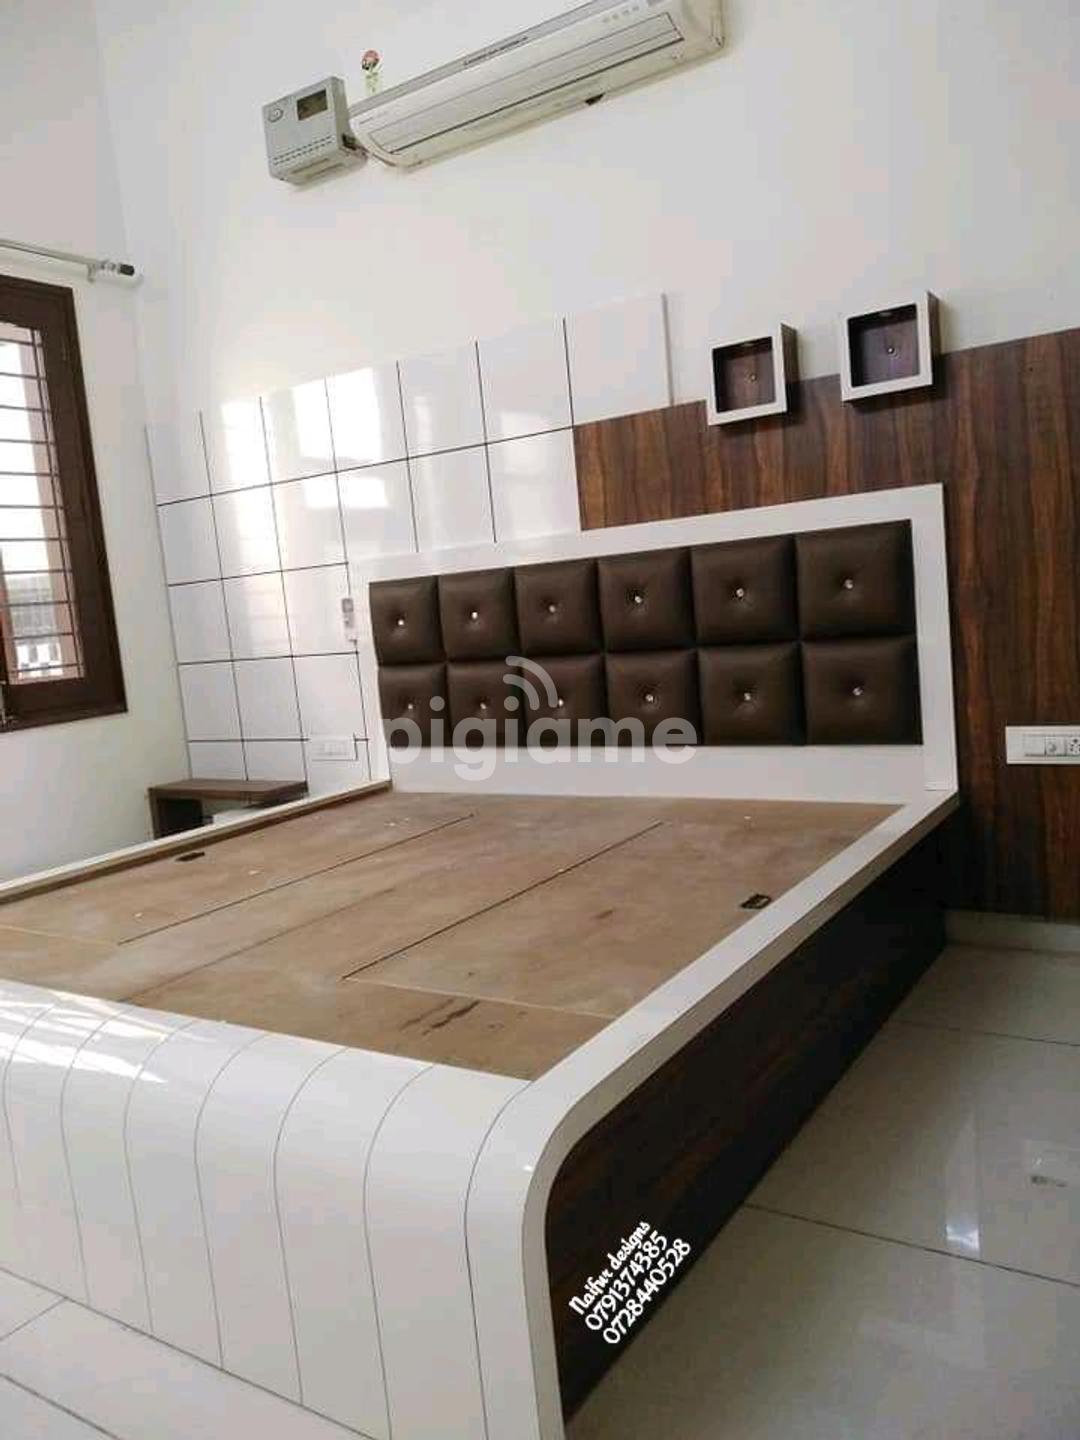 Modern Beds Beds For Sale In Nairobi Kenya Latest Bed Designs In Nairobi Pigiame